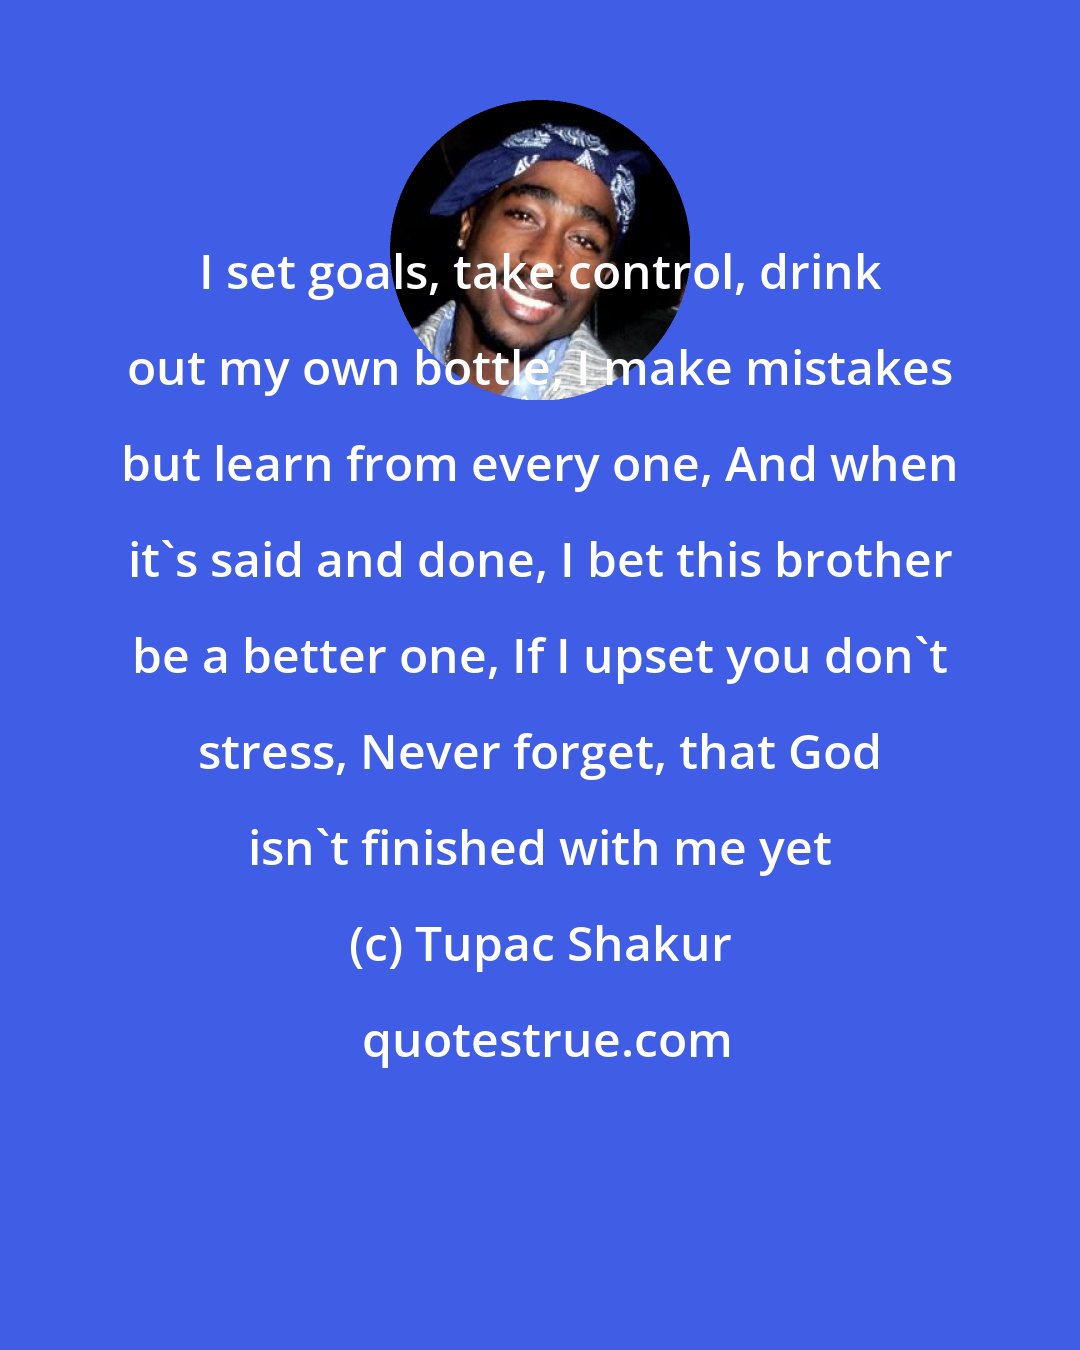 Tupac Shakur: I set goals, take control, drink out my own bottle, I make mistakes but learn from every one, And when it's said and done, I bet this brother be a better one, If I upset you don't stress, Never forget, that God isn't finished with me yet